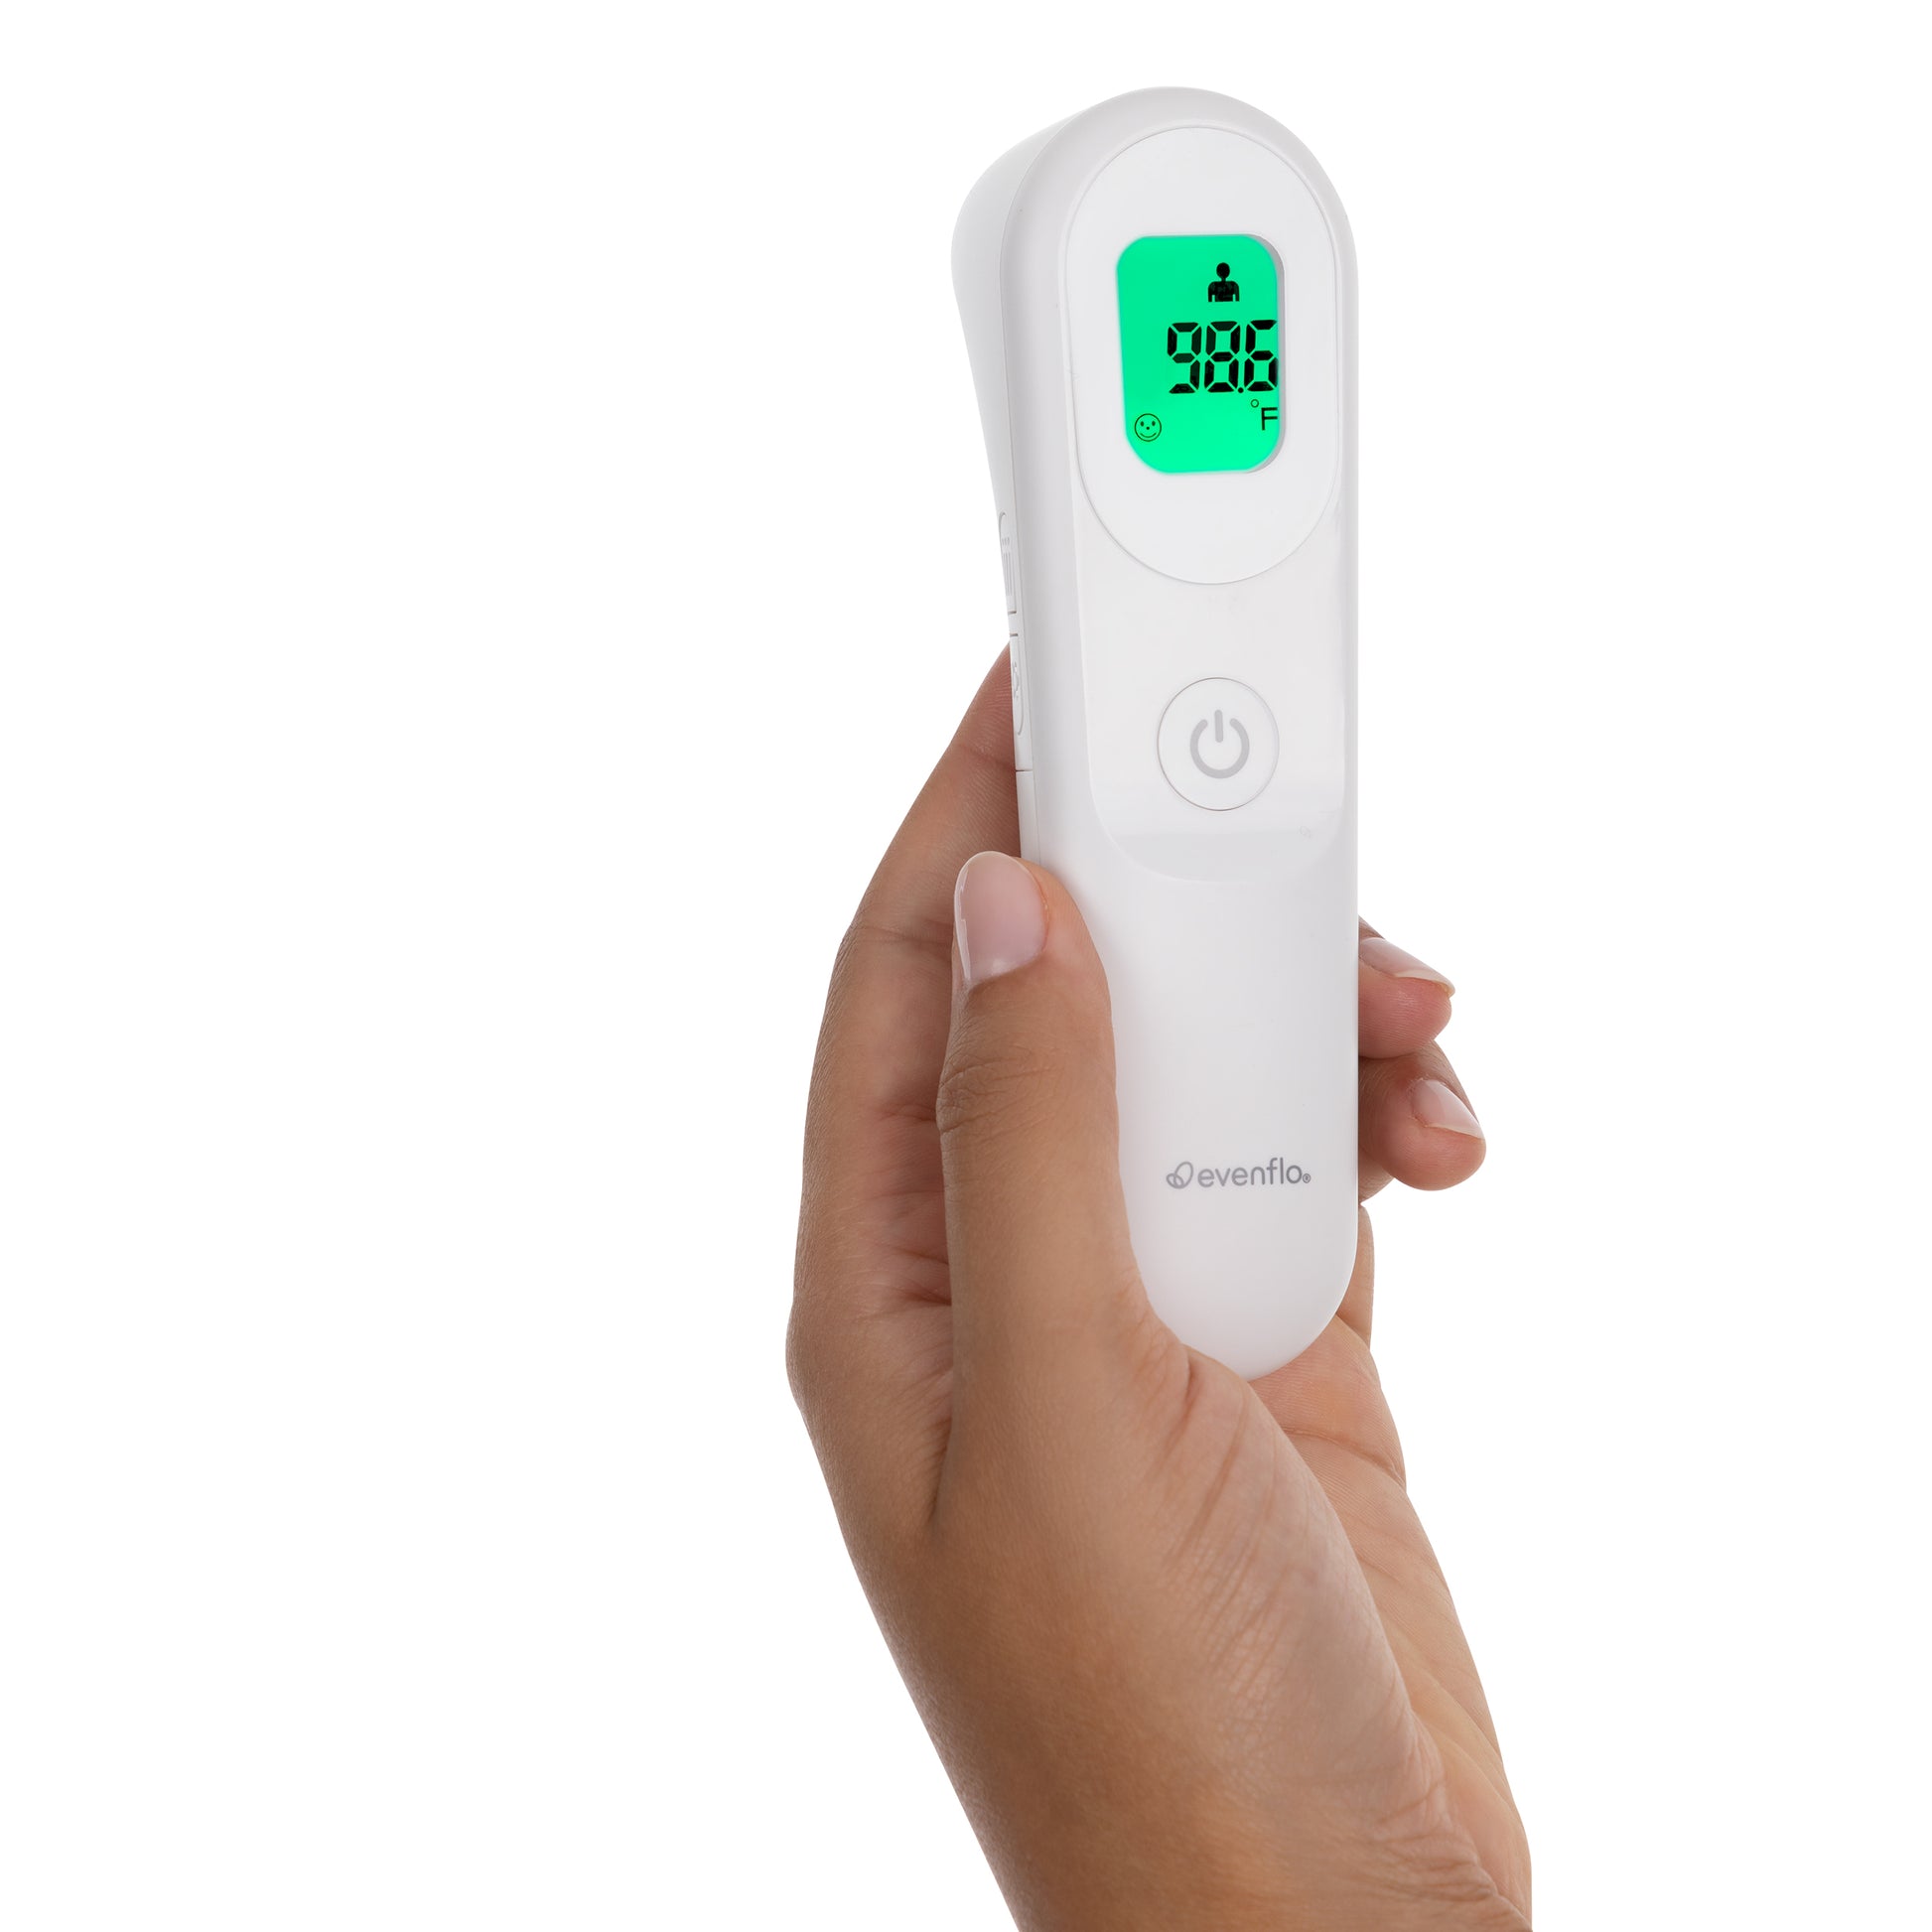 How Do Touchless Thermometers Work? Are They Accurate?